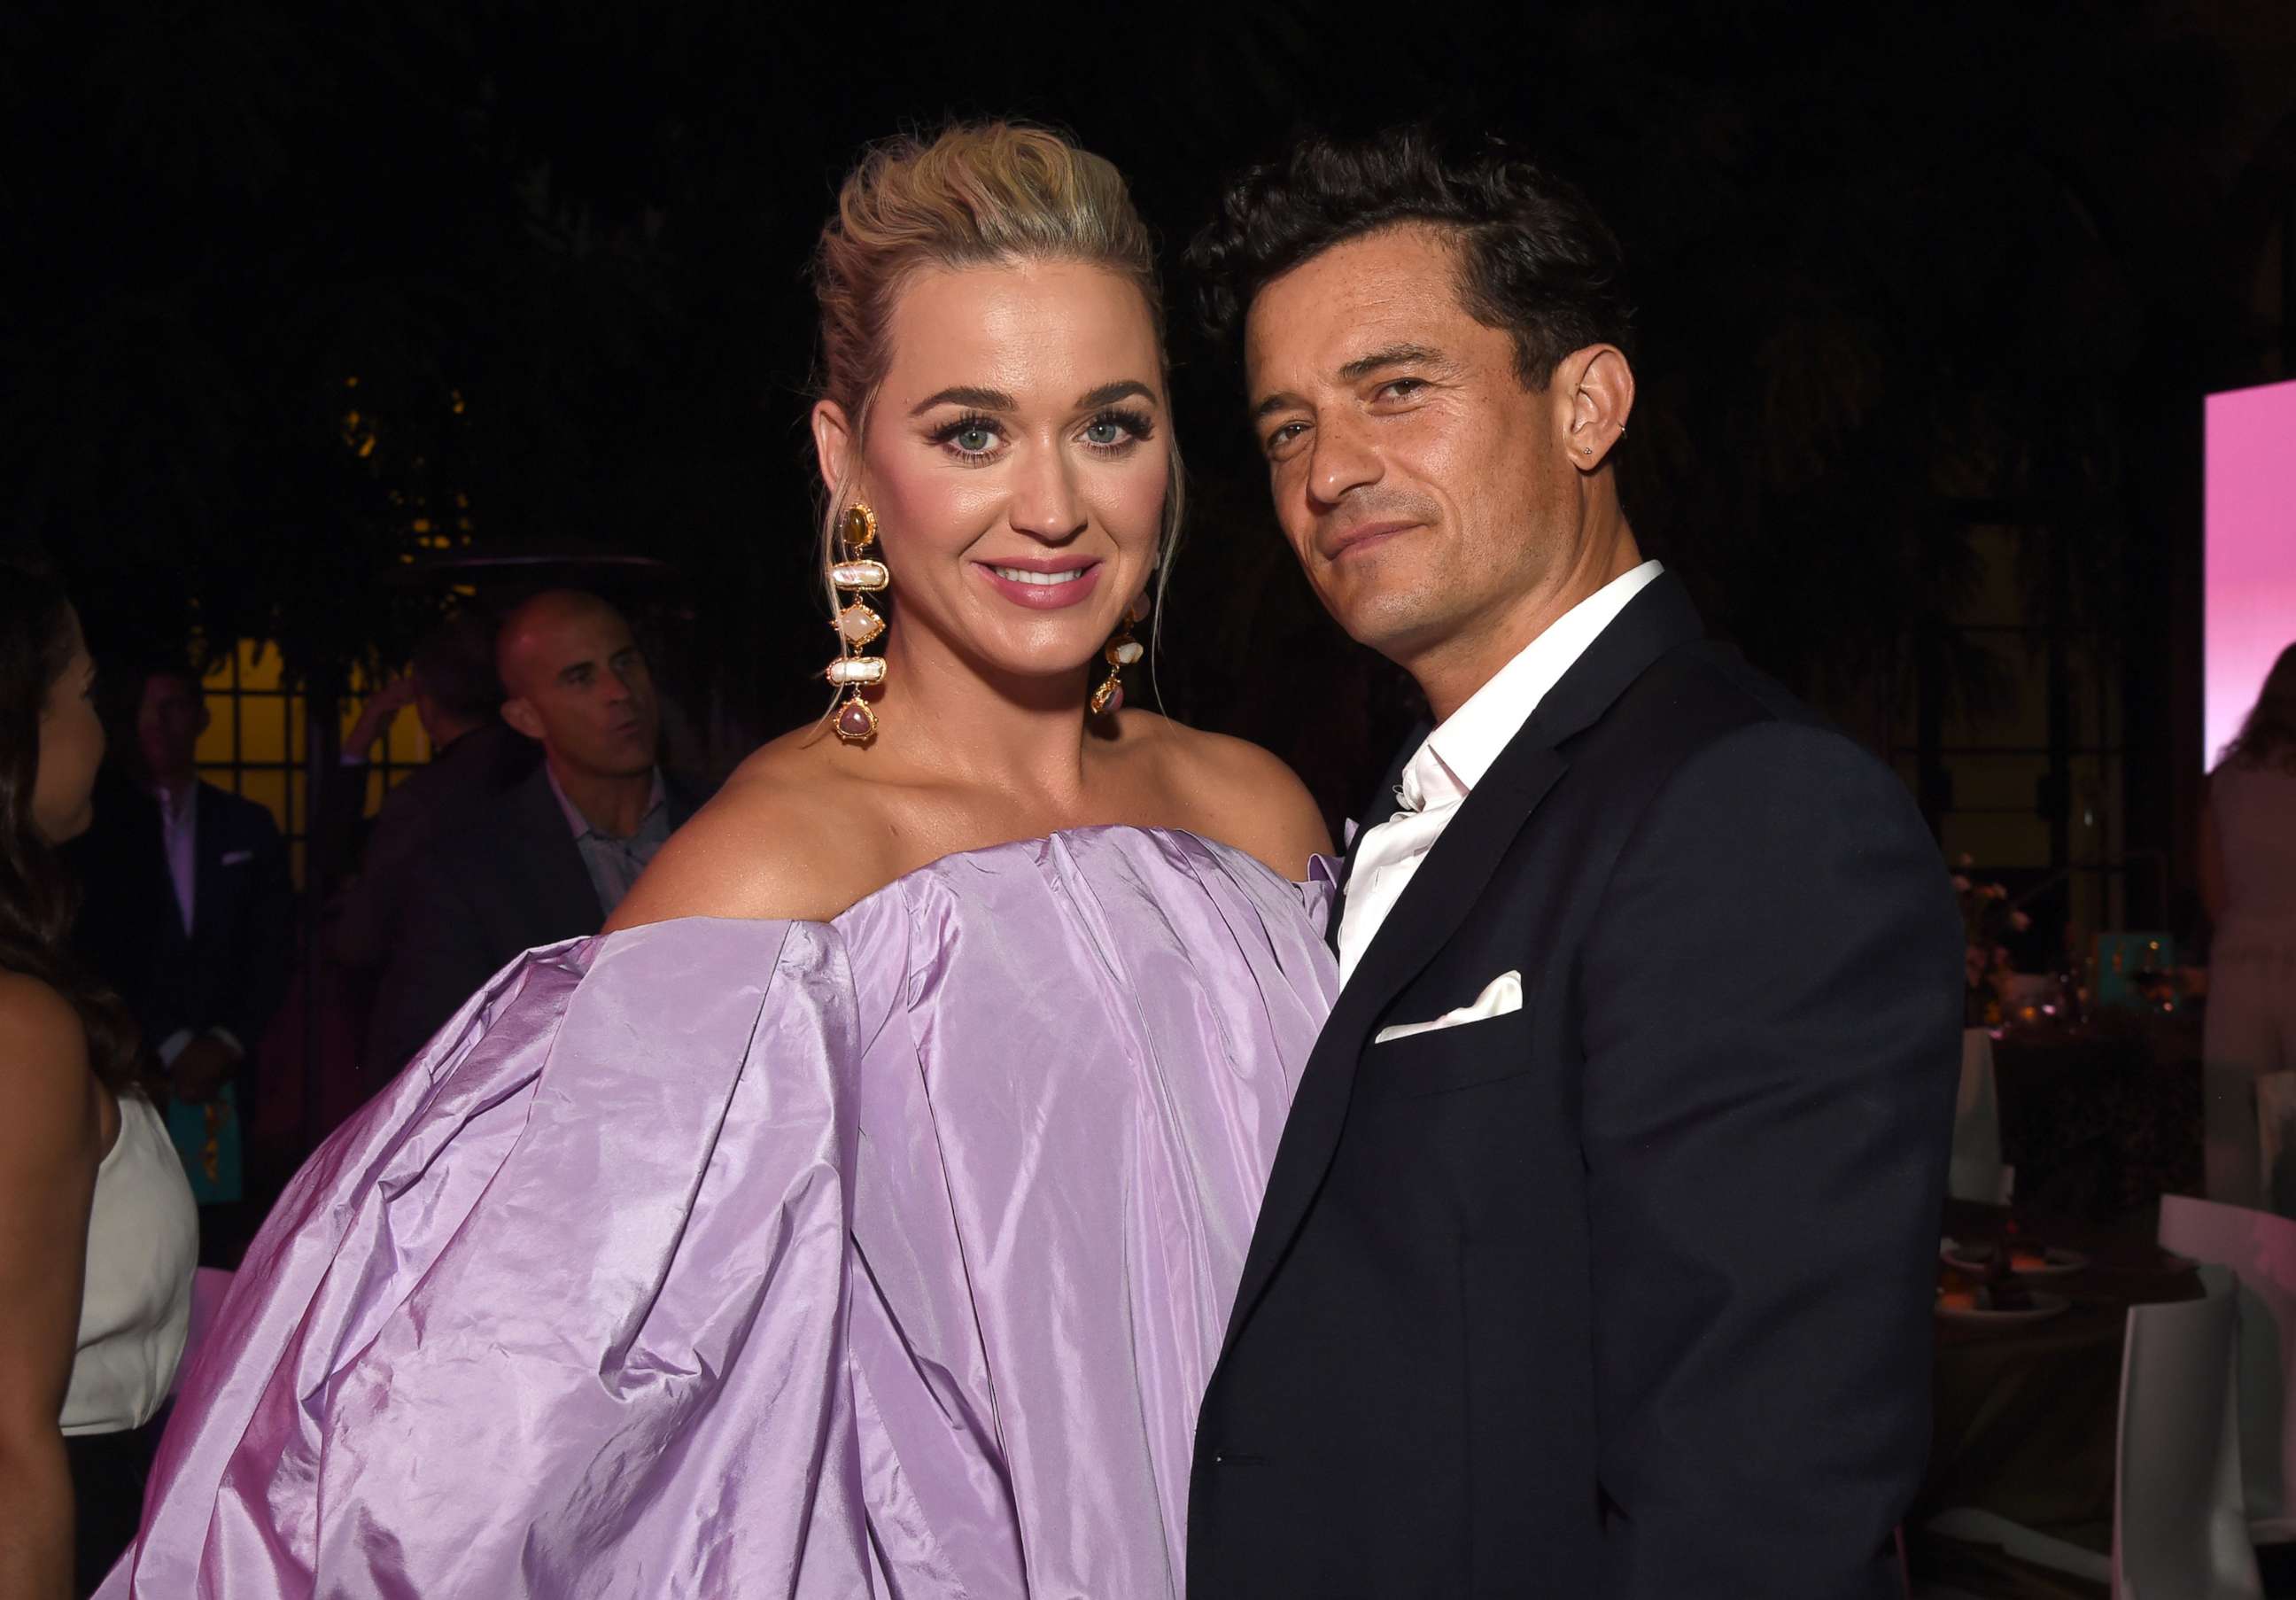 PHOTO: Katy Perry and Orlando Bloom attend Variety's Power of Women in Los Angeles, Sept. 30, 2021.